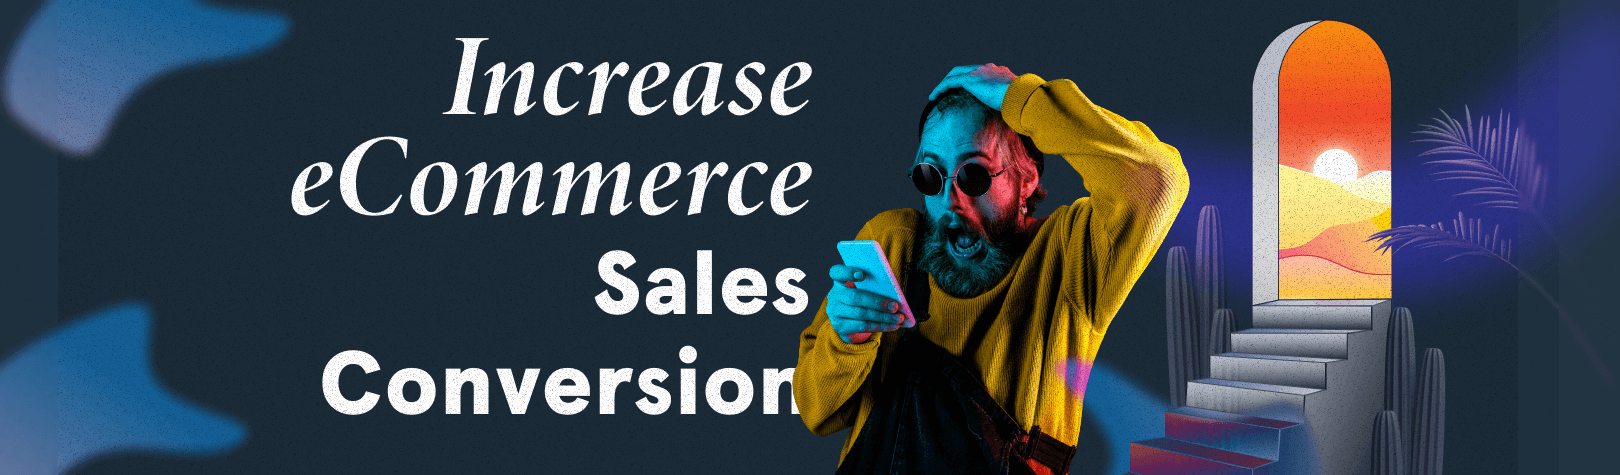 Increase eCommerce Sales Conversion